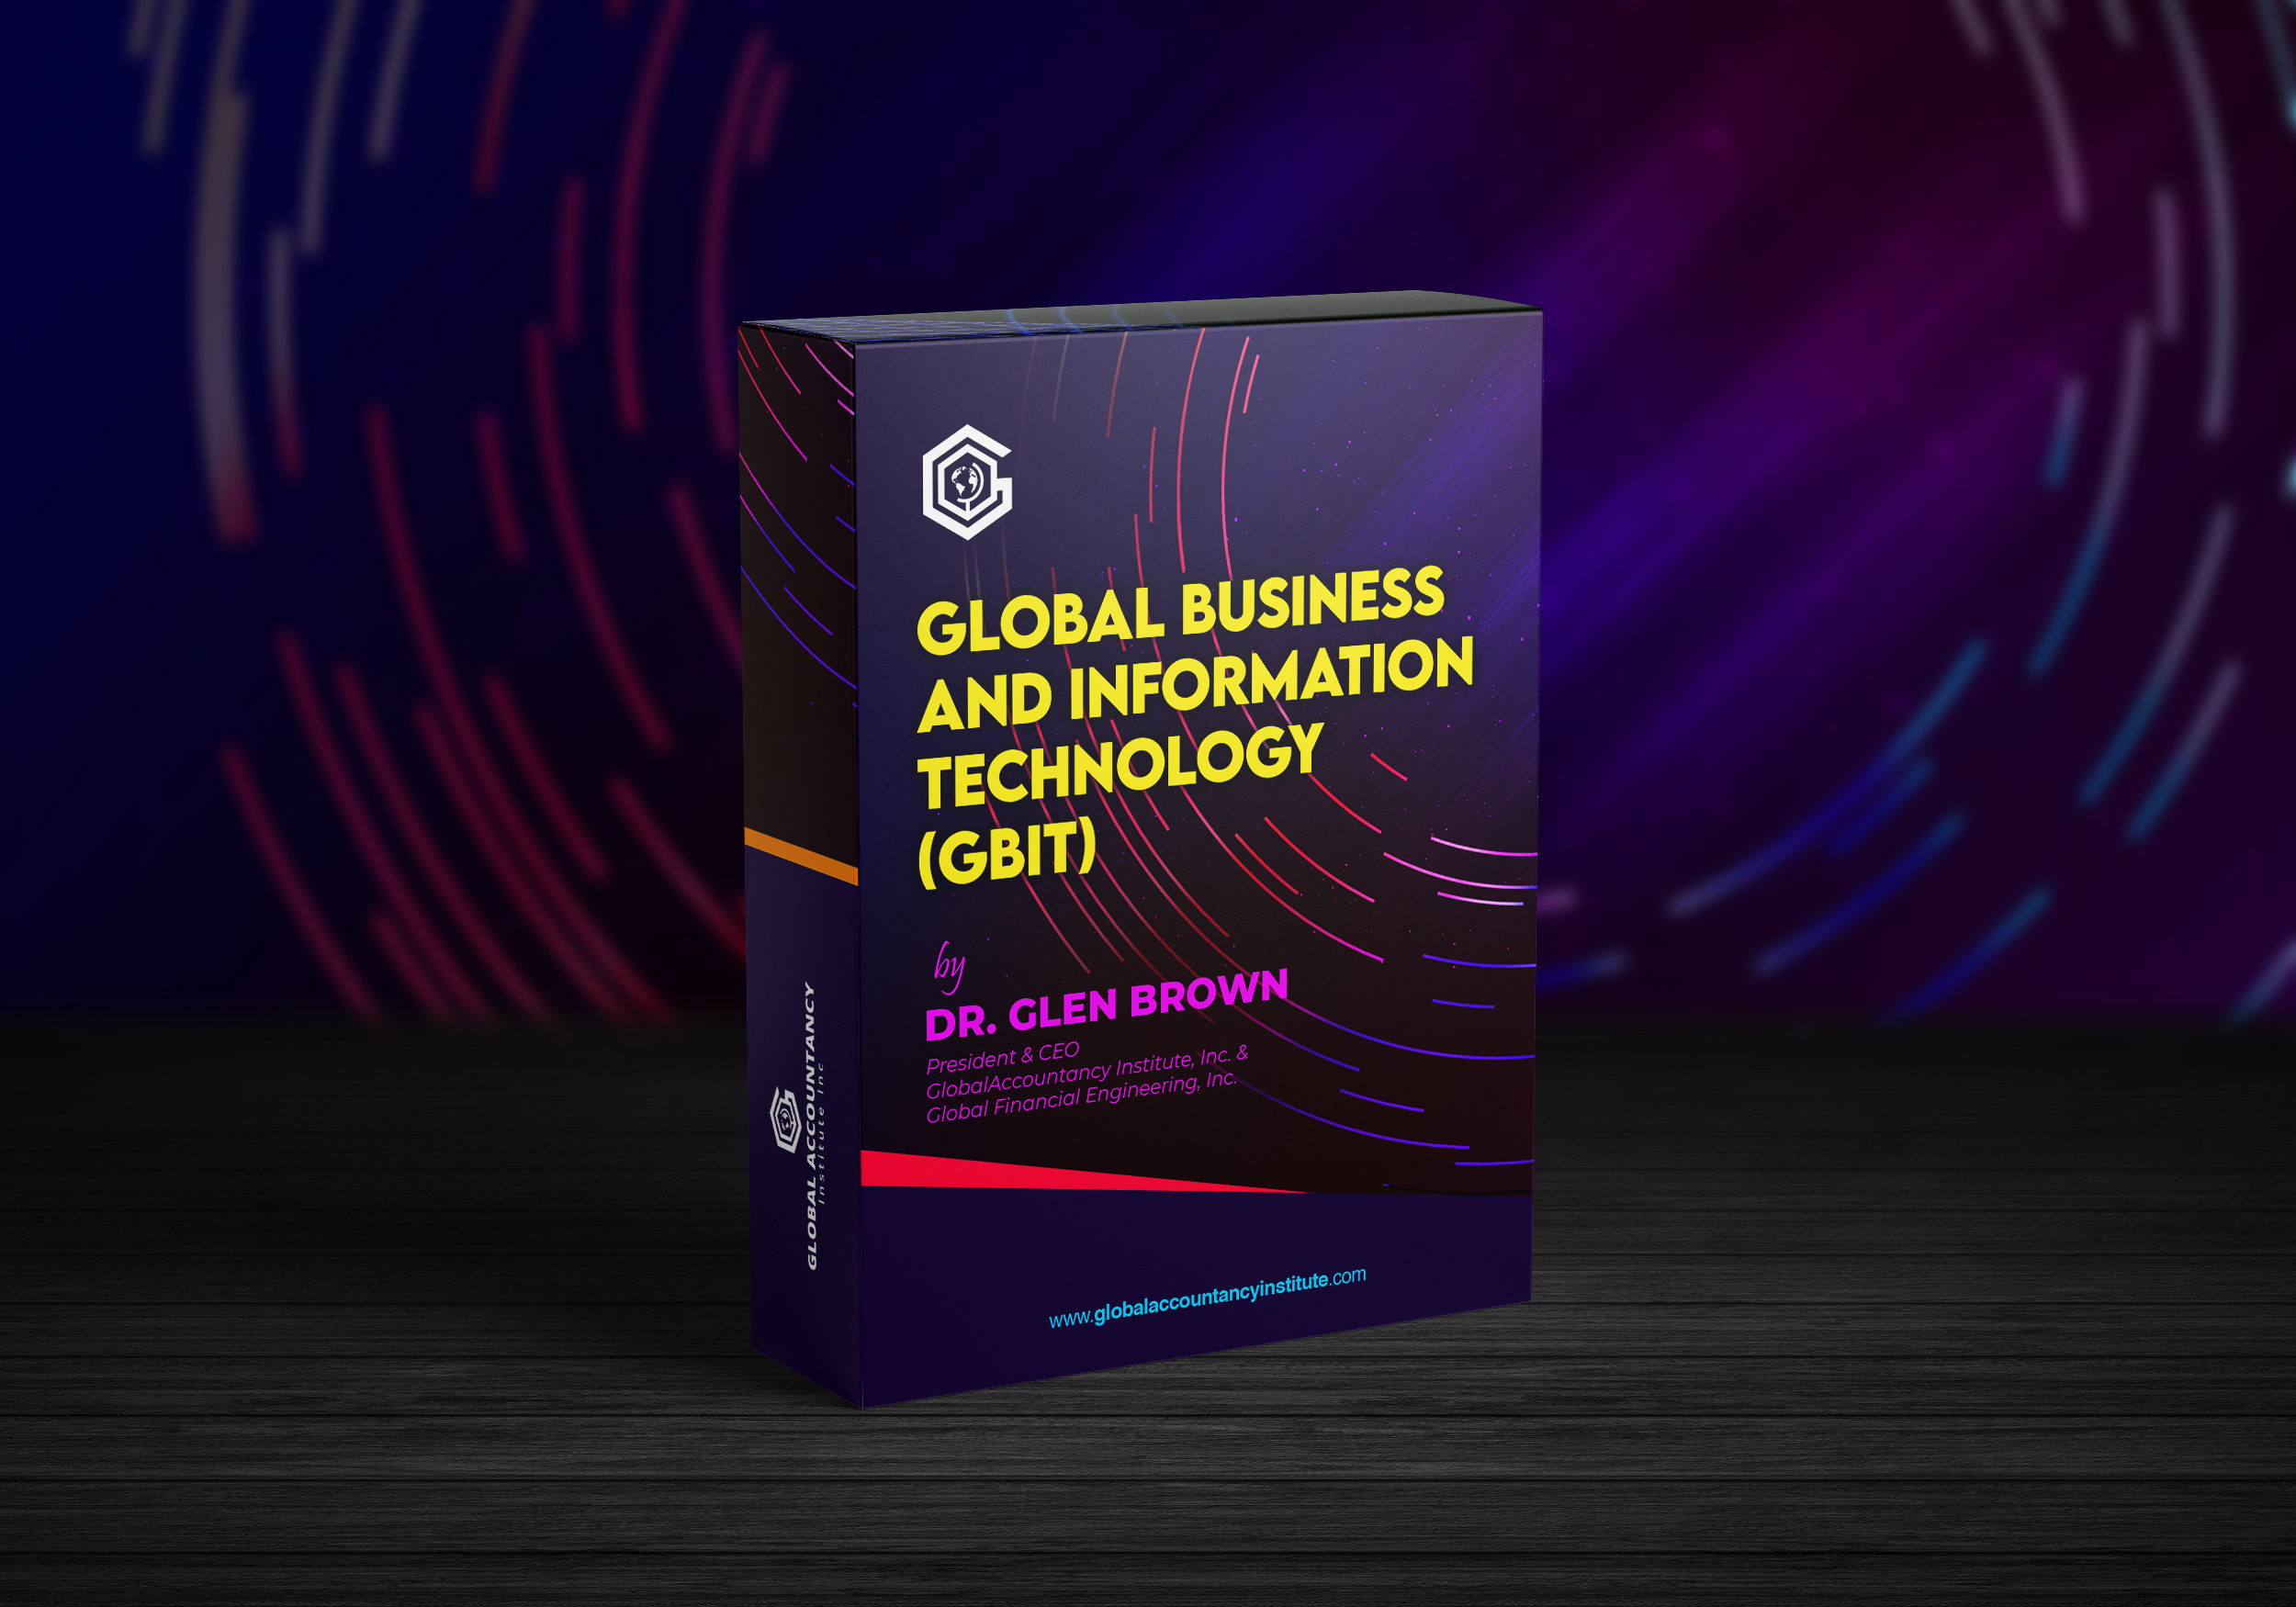 Global Business and Information Technology(GBIT)